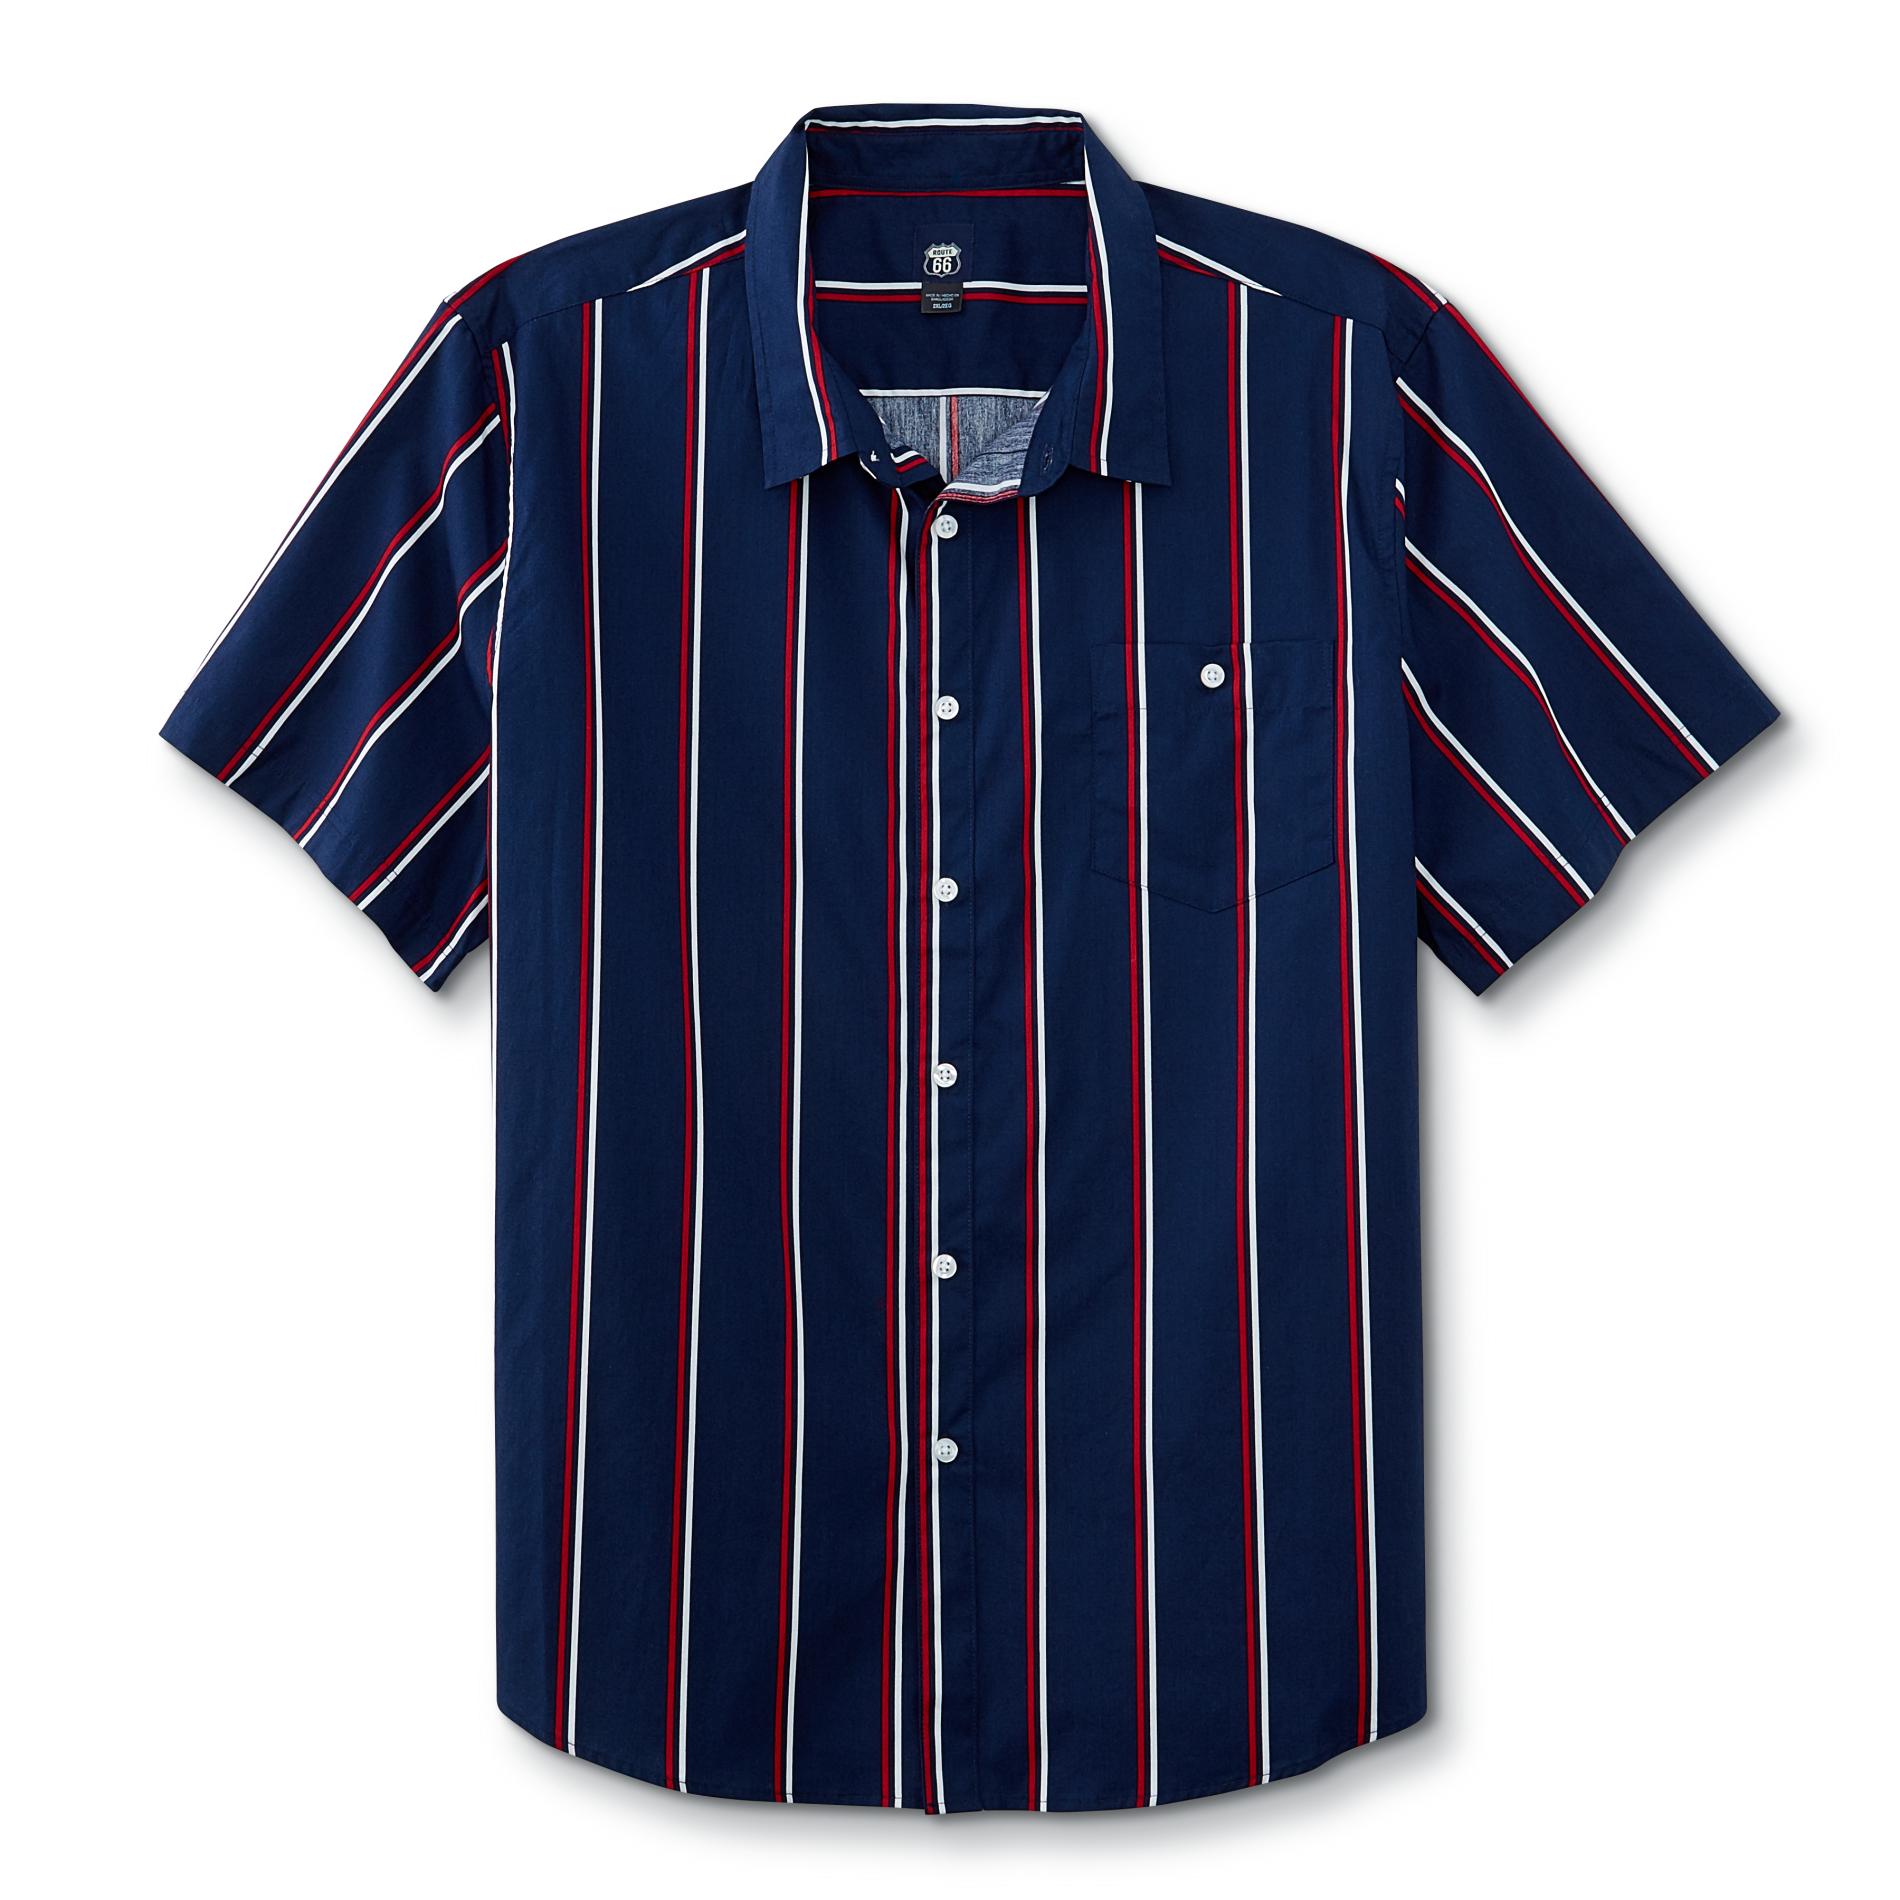 Route 66 Young Men's Short-Sleeve Shirt - Striped